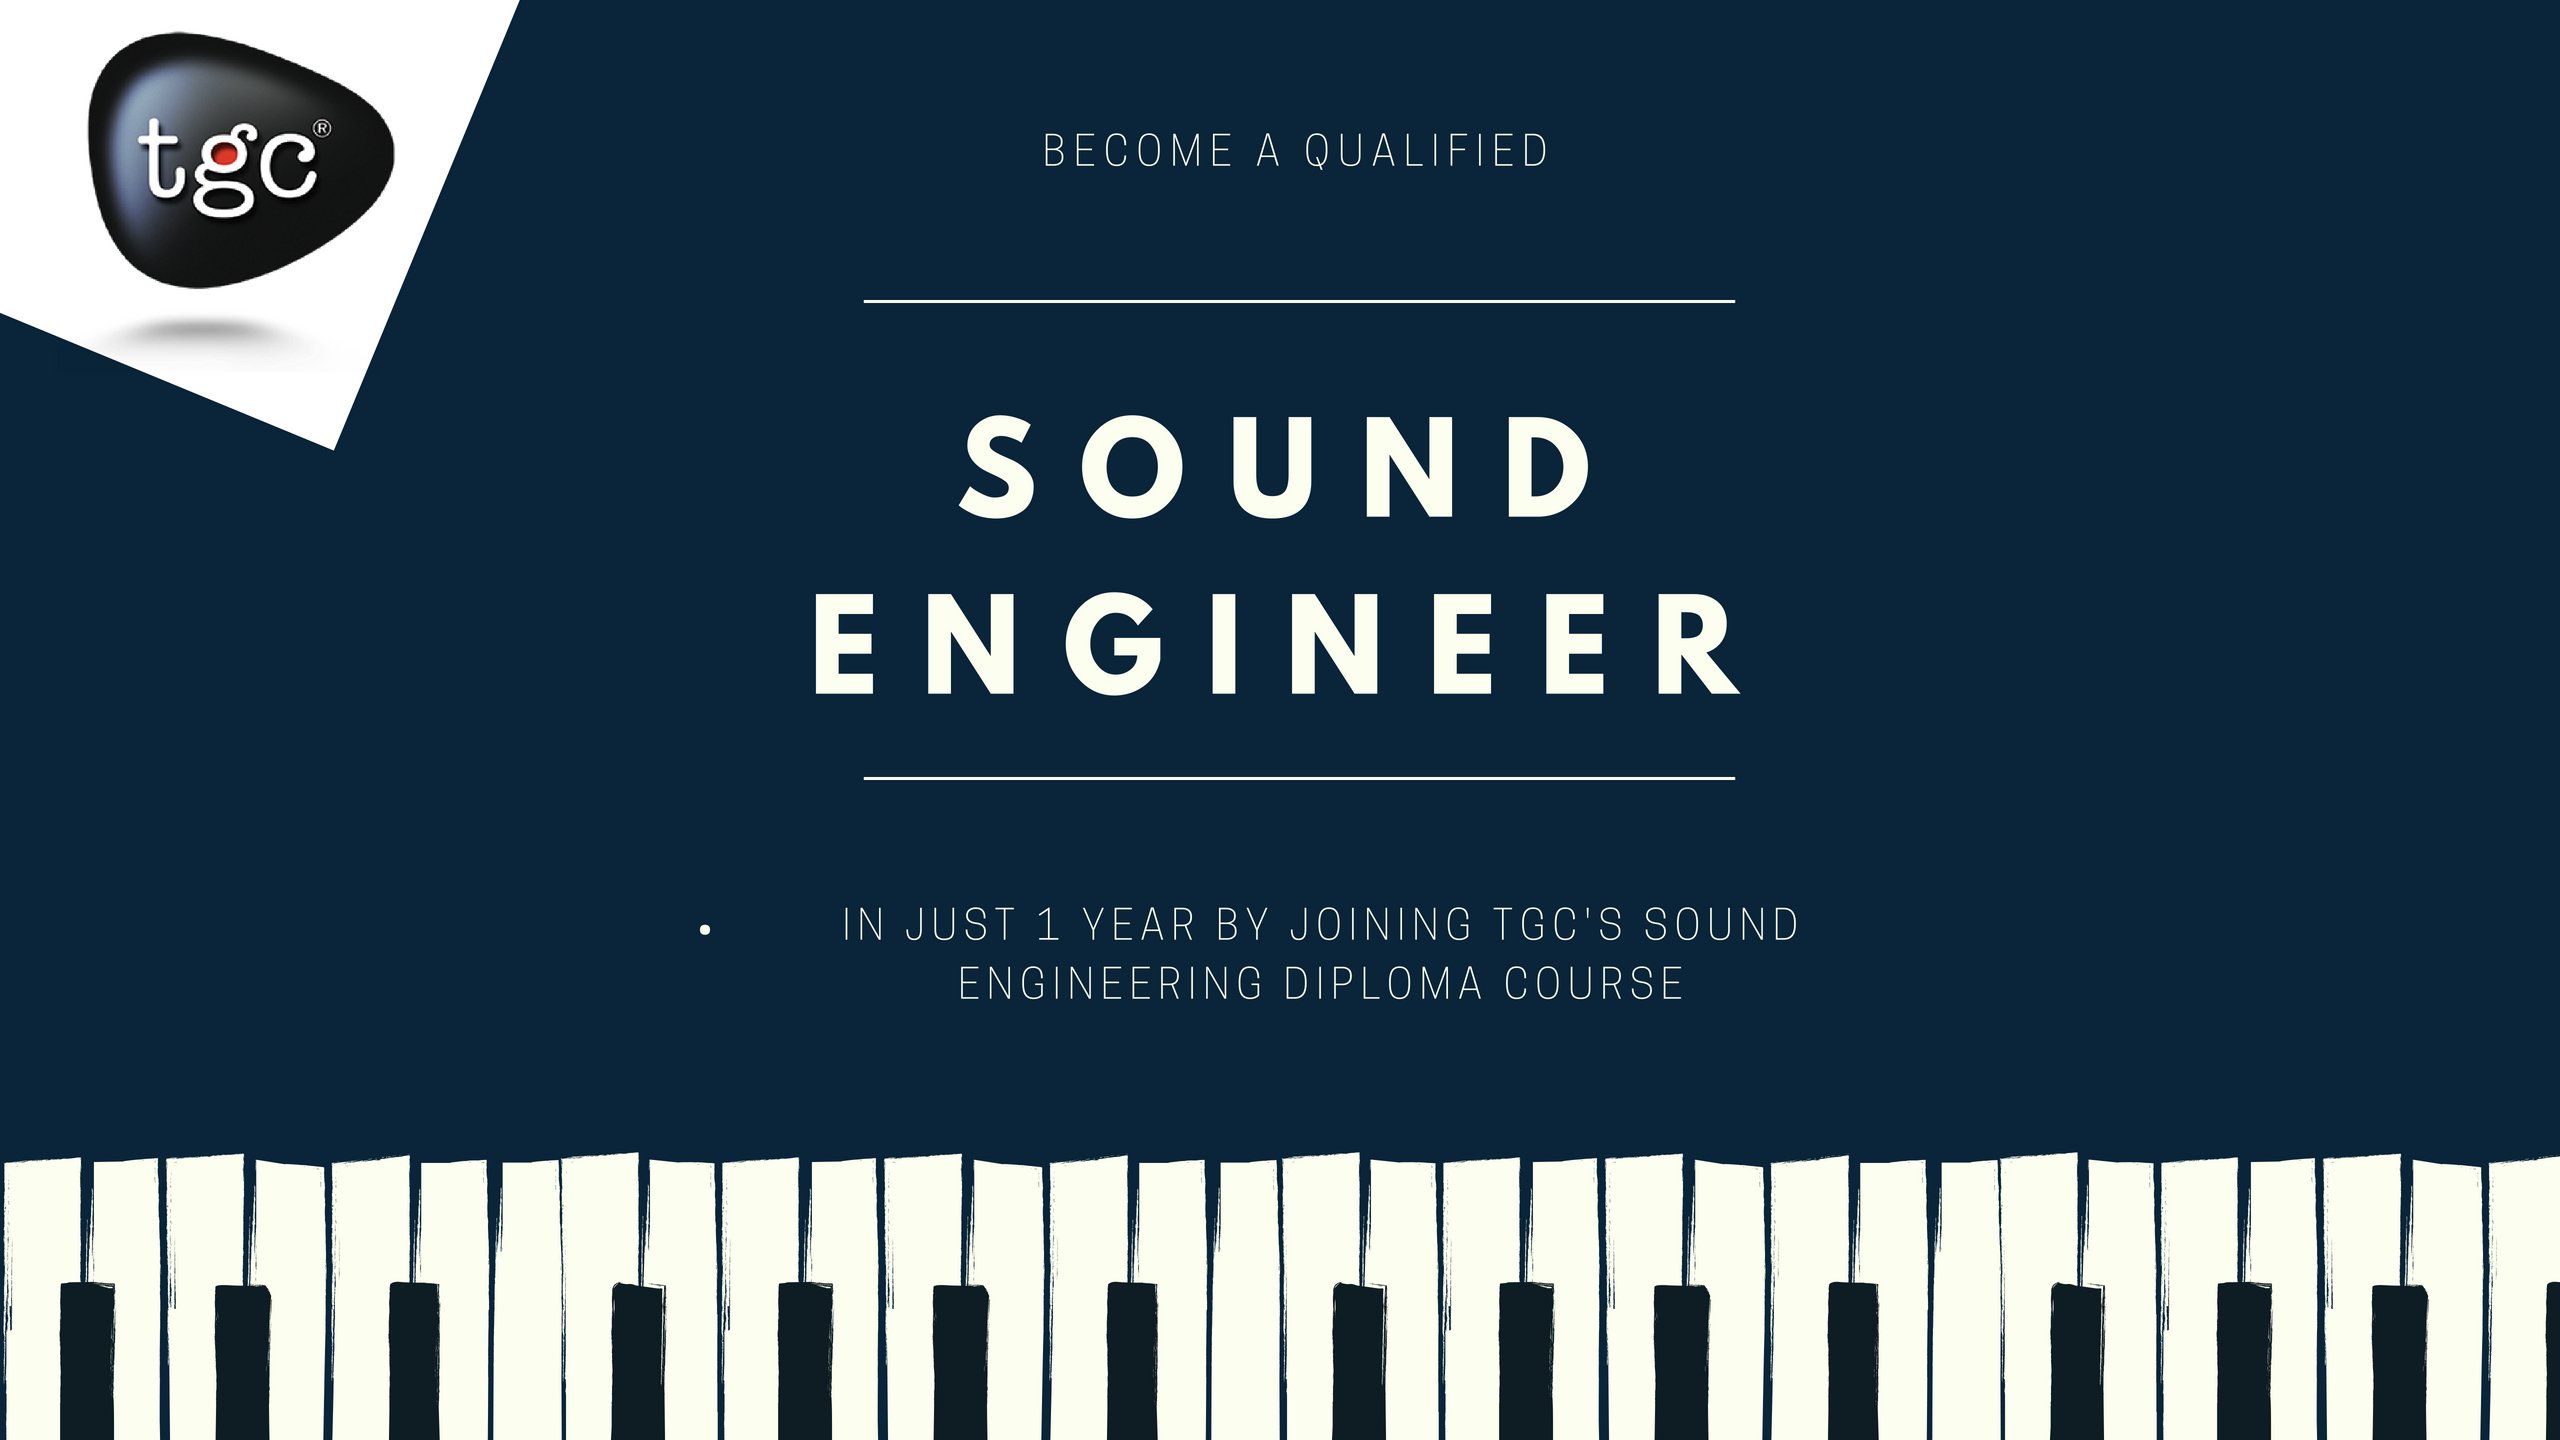 Become a qualified Sound Engineer in just 1 year by joining TGC's Sound Engineering Diploma course 1